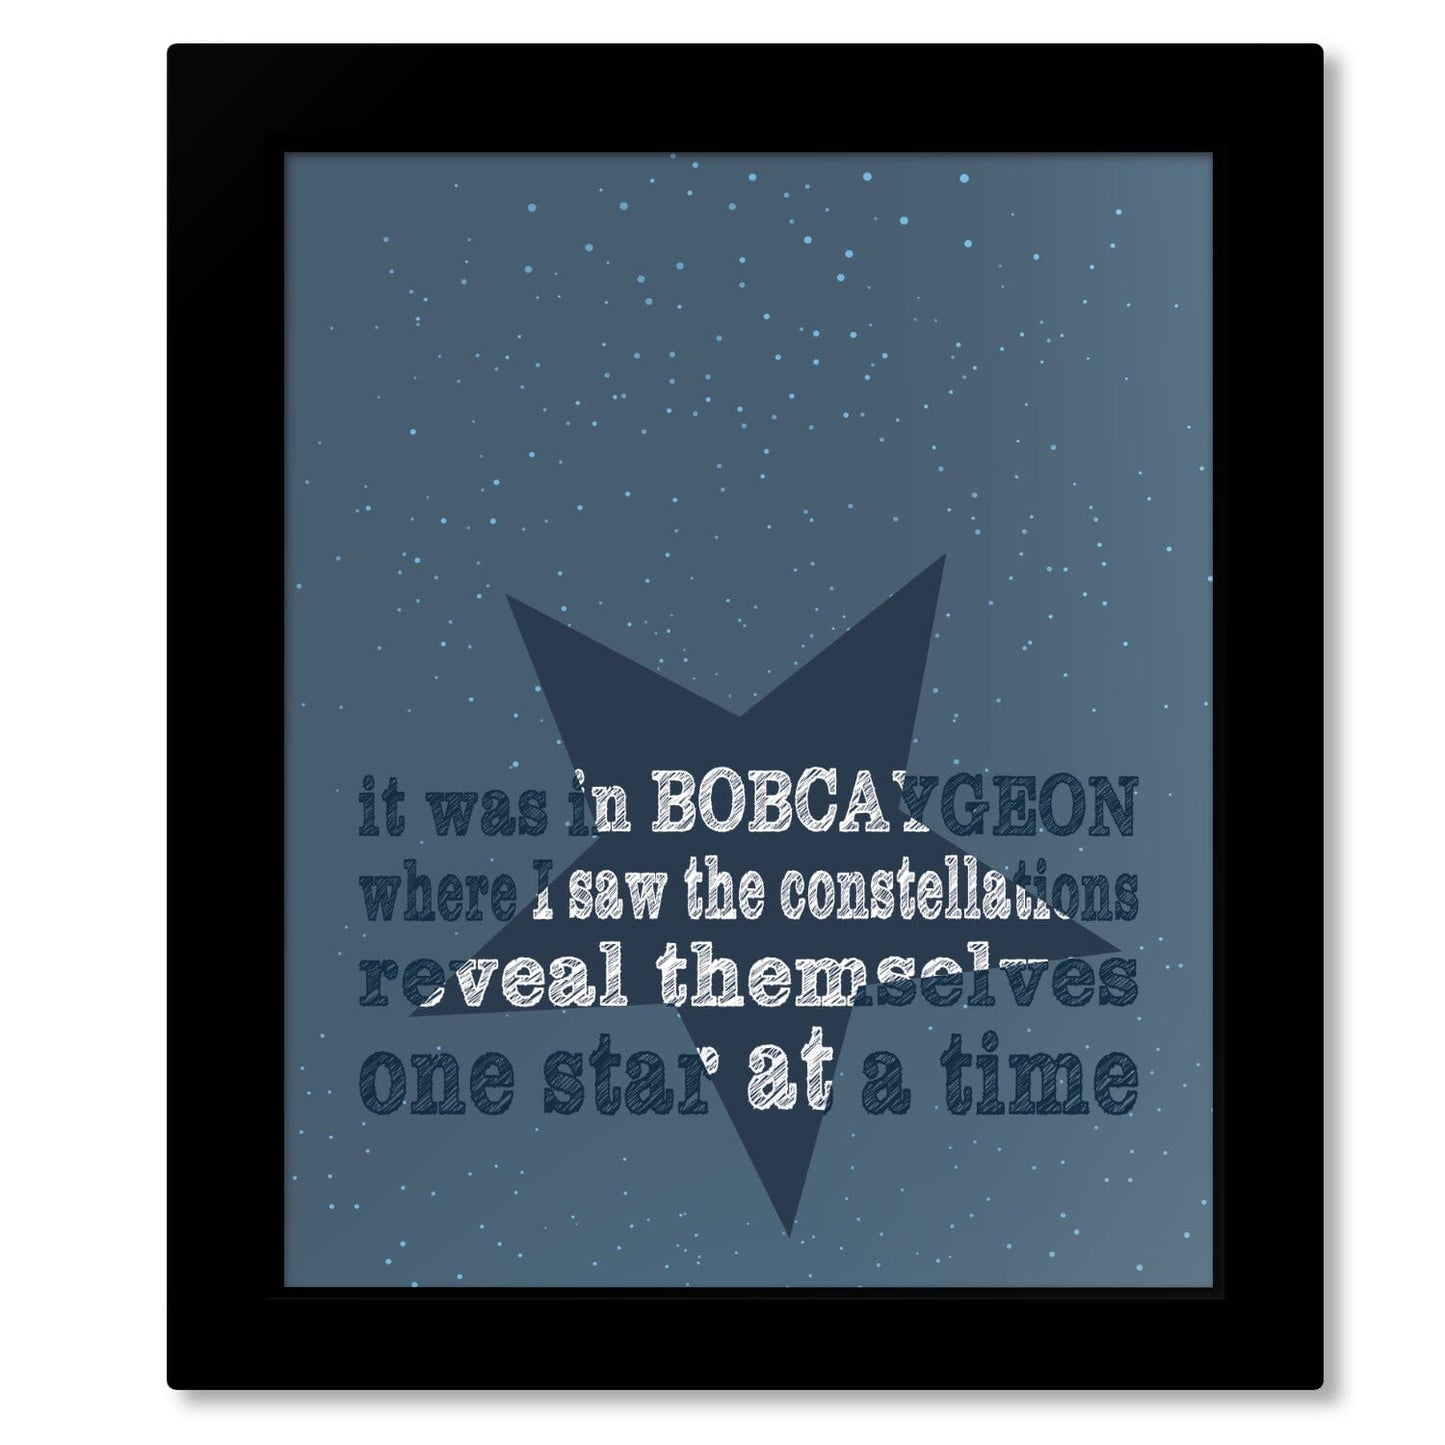 Bobcaygeon by Tragically Hip - Music Poster Song Lyric Art Song Lyrics Art Song Lyrics Art Framed 8x10 Print (without mat) 